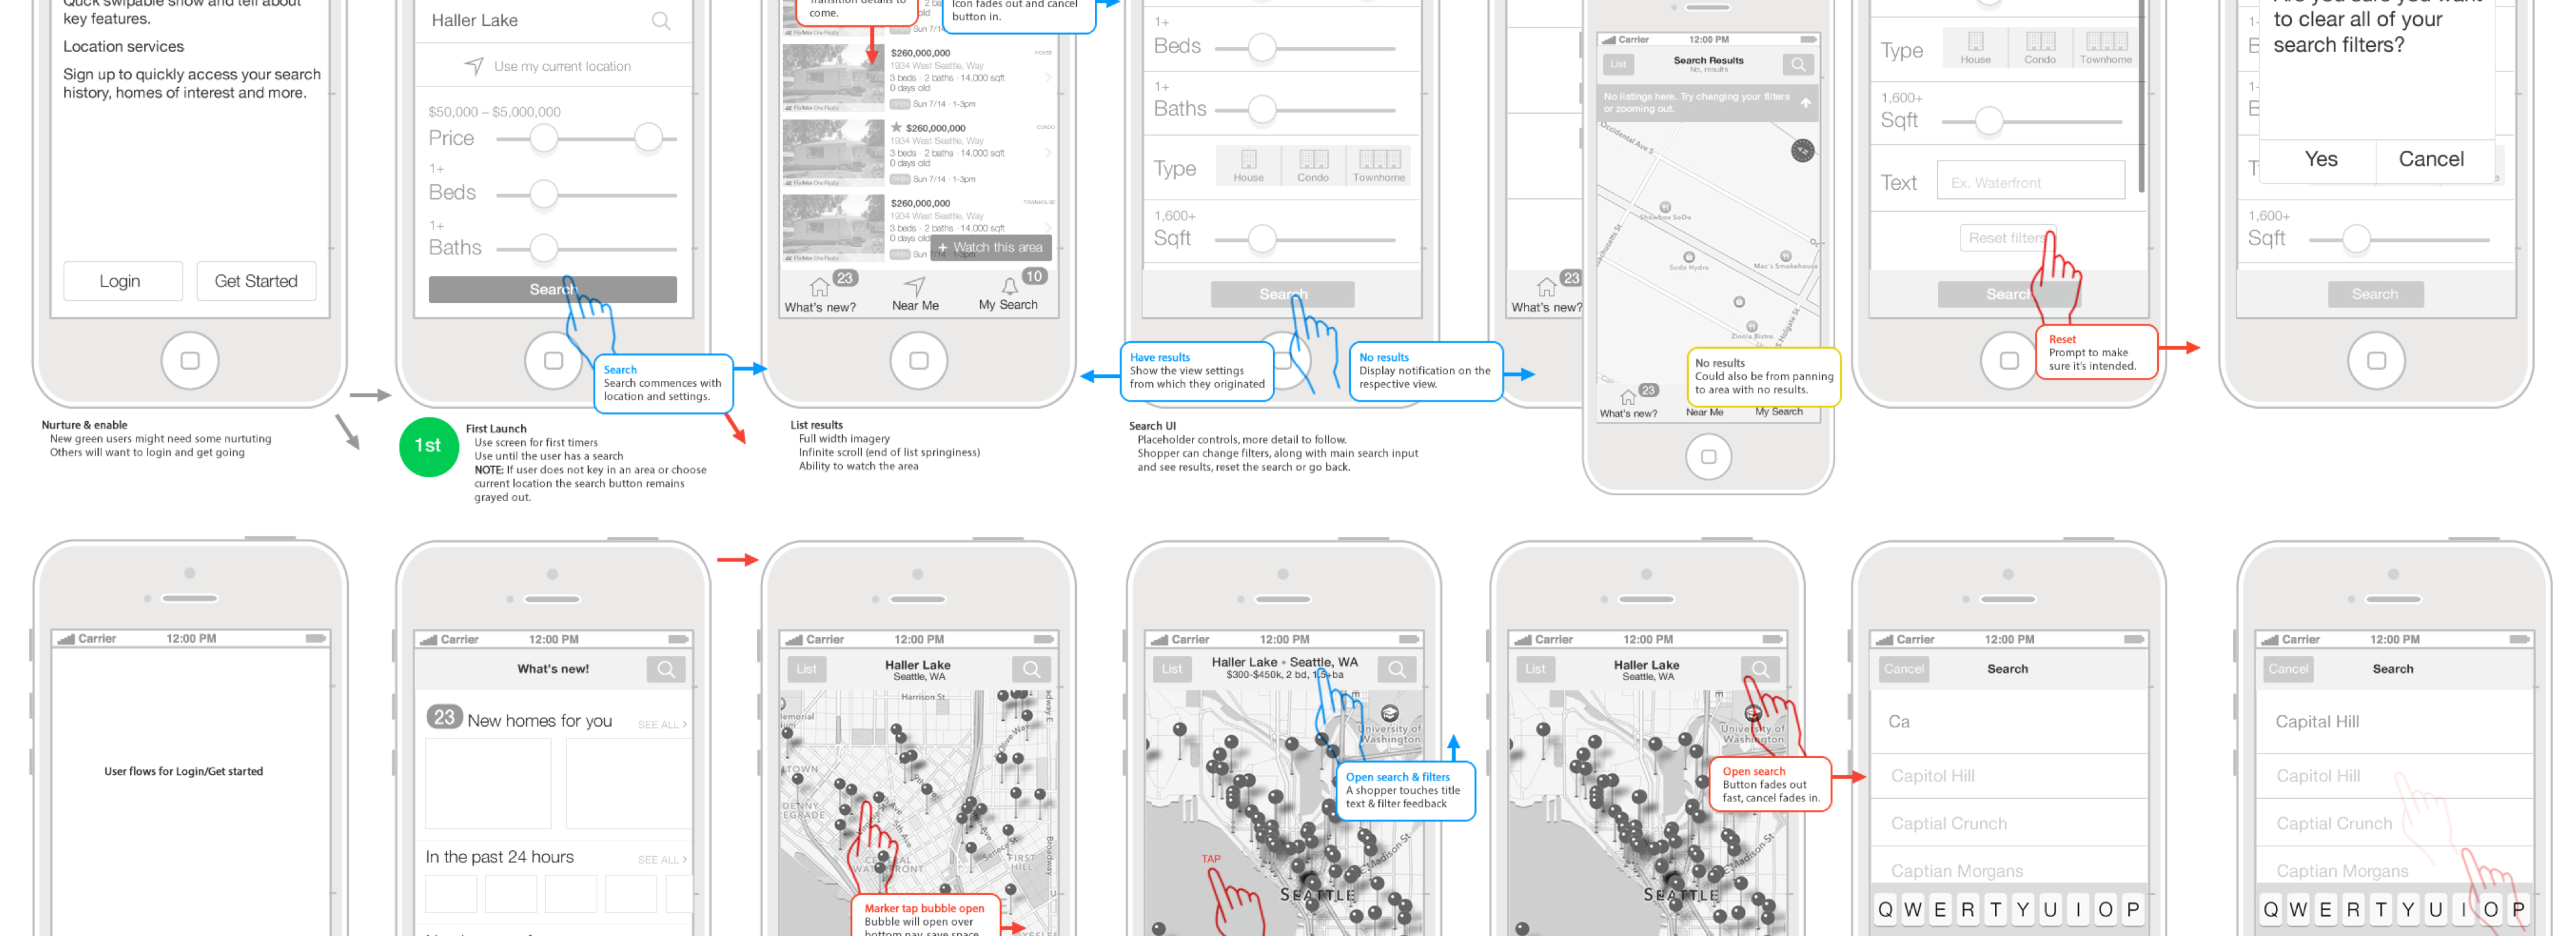 Process wire-frames created to explore user flows through home search.